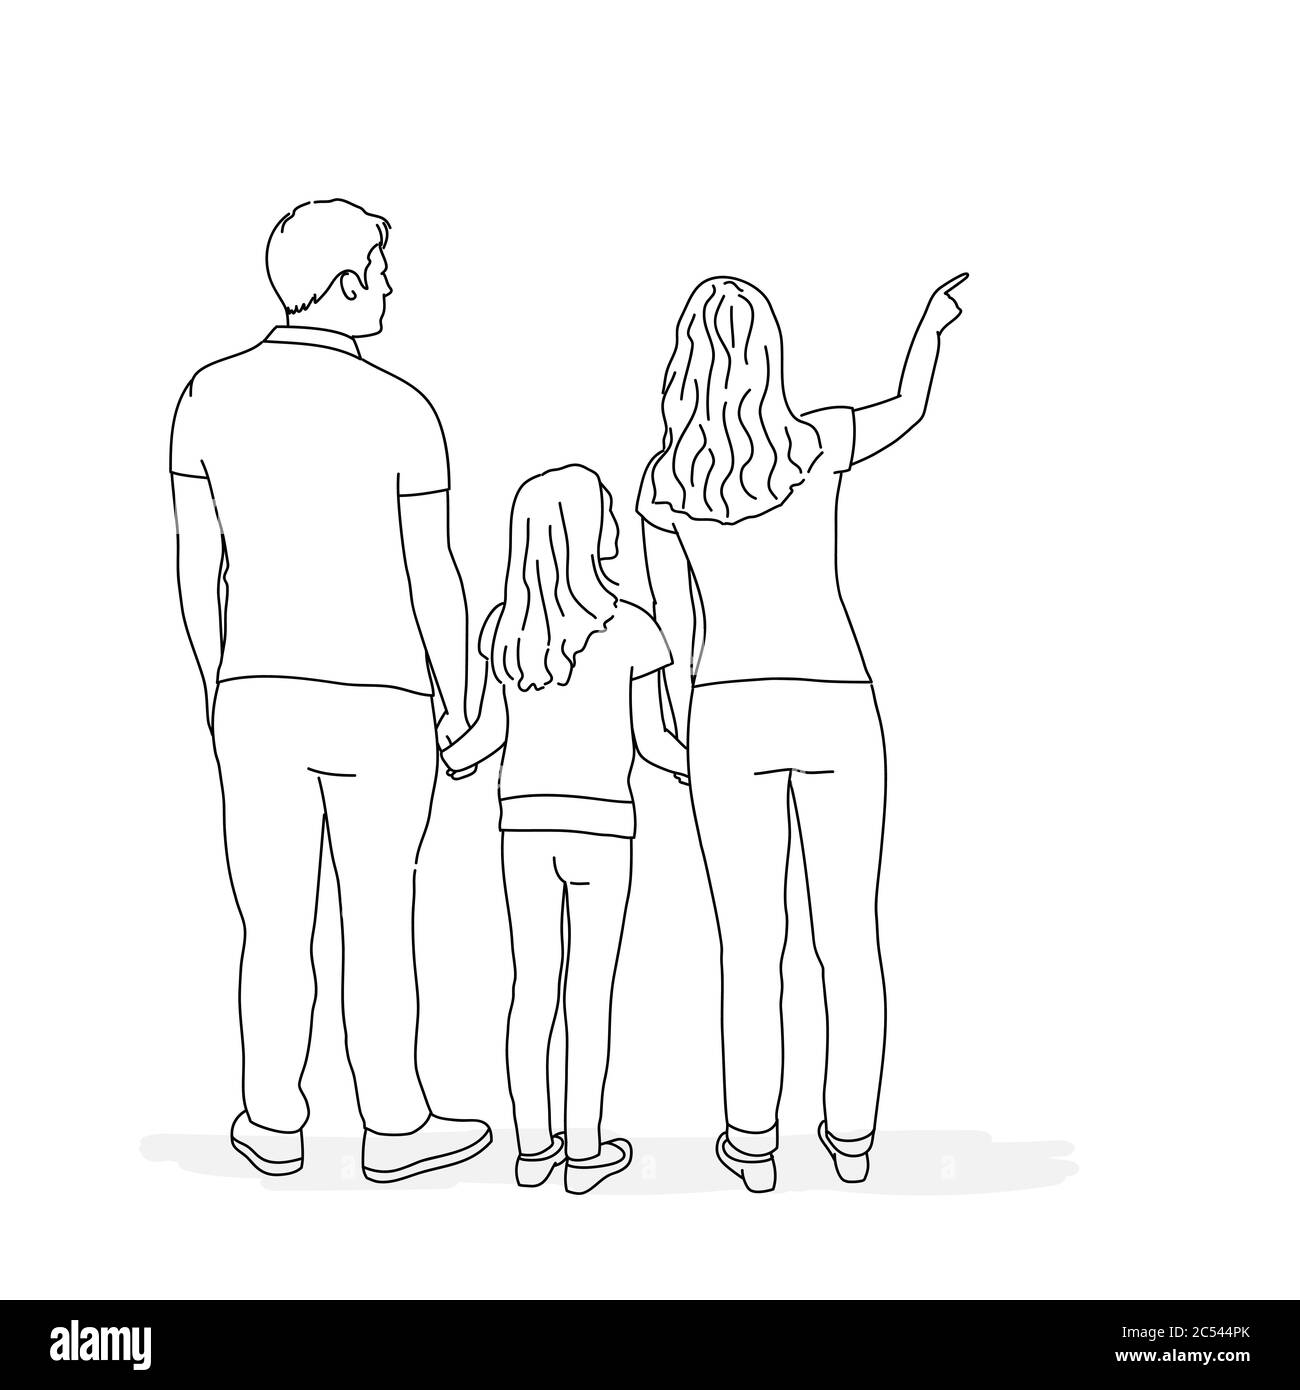 Fathers Day Drawing - How To Draw Father's Day Step By Step